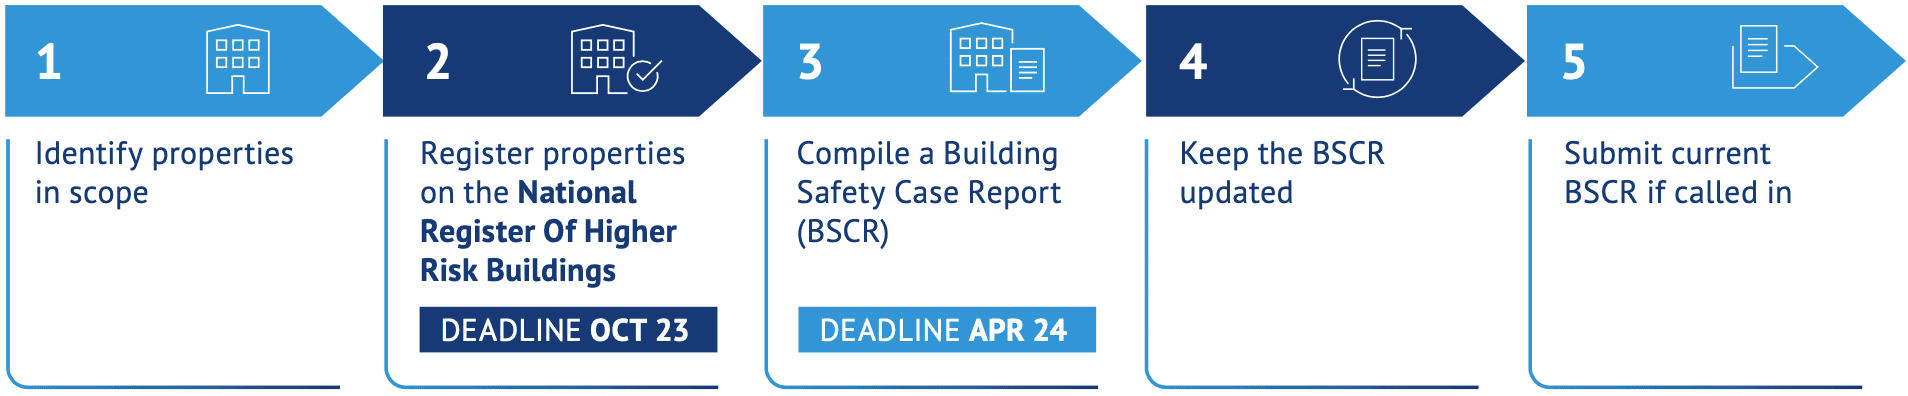 building safety act steps